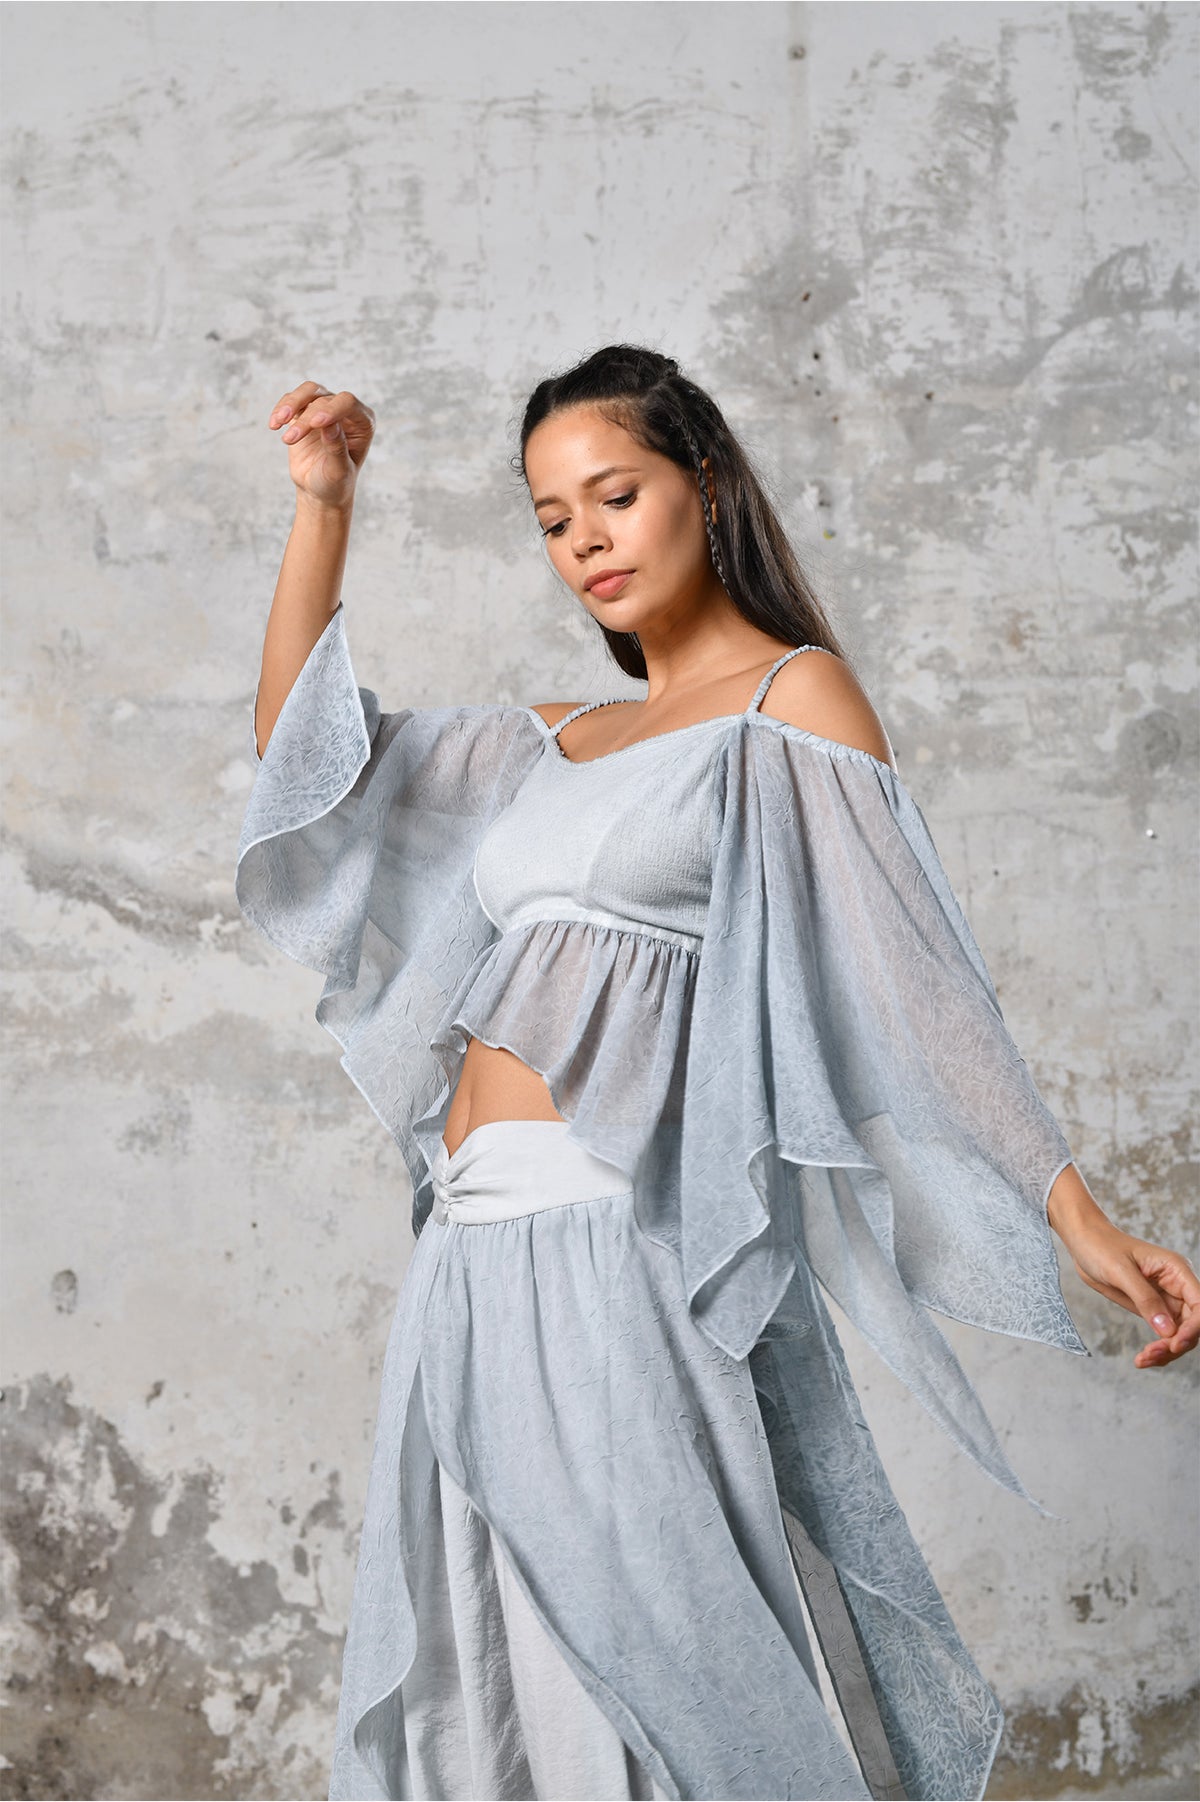 An enchanting Bohemian Venus BLUE, perfect for boho and festival-inspired looks, exuding a goddess-like quality. The flowy fabric and intricate side details create an ethereal, bohemian style perfect for Burning Man and other occasions. This garment is an ethically crafted gem